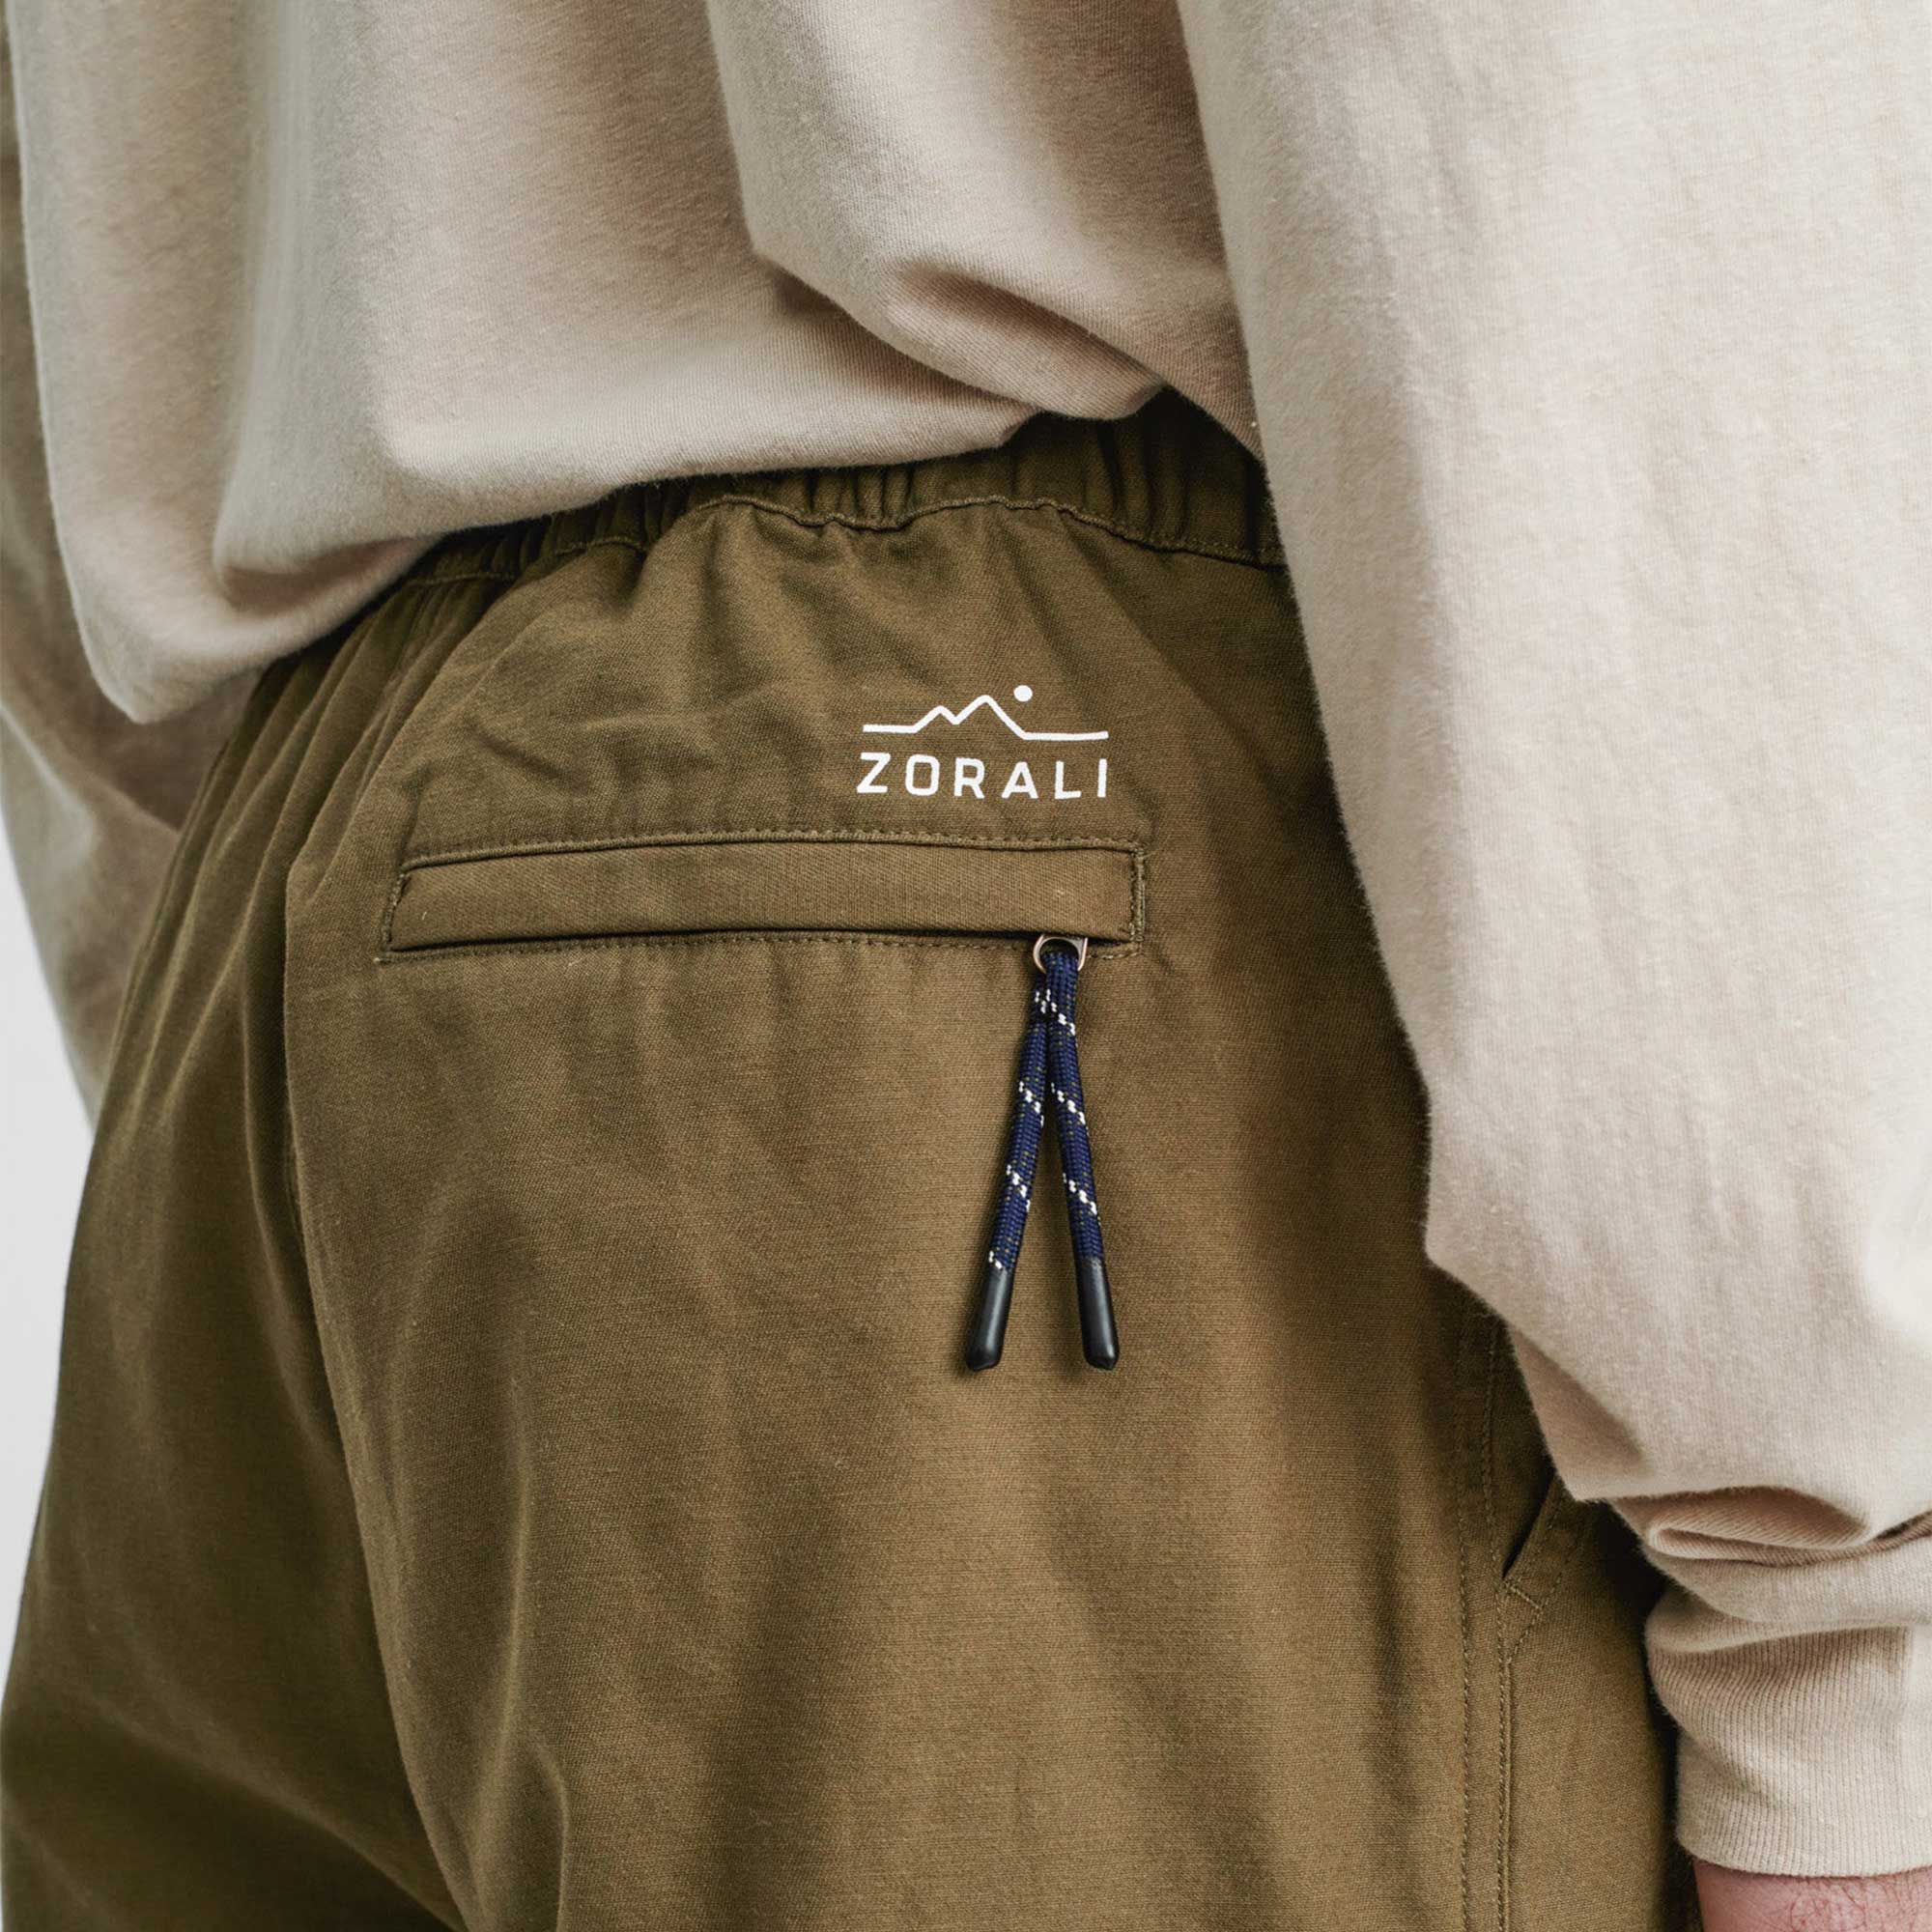 Twill All-Purpose Pant Olive